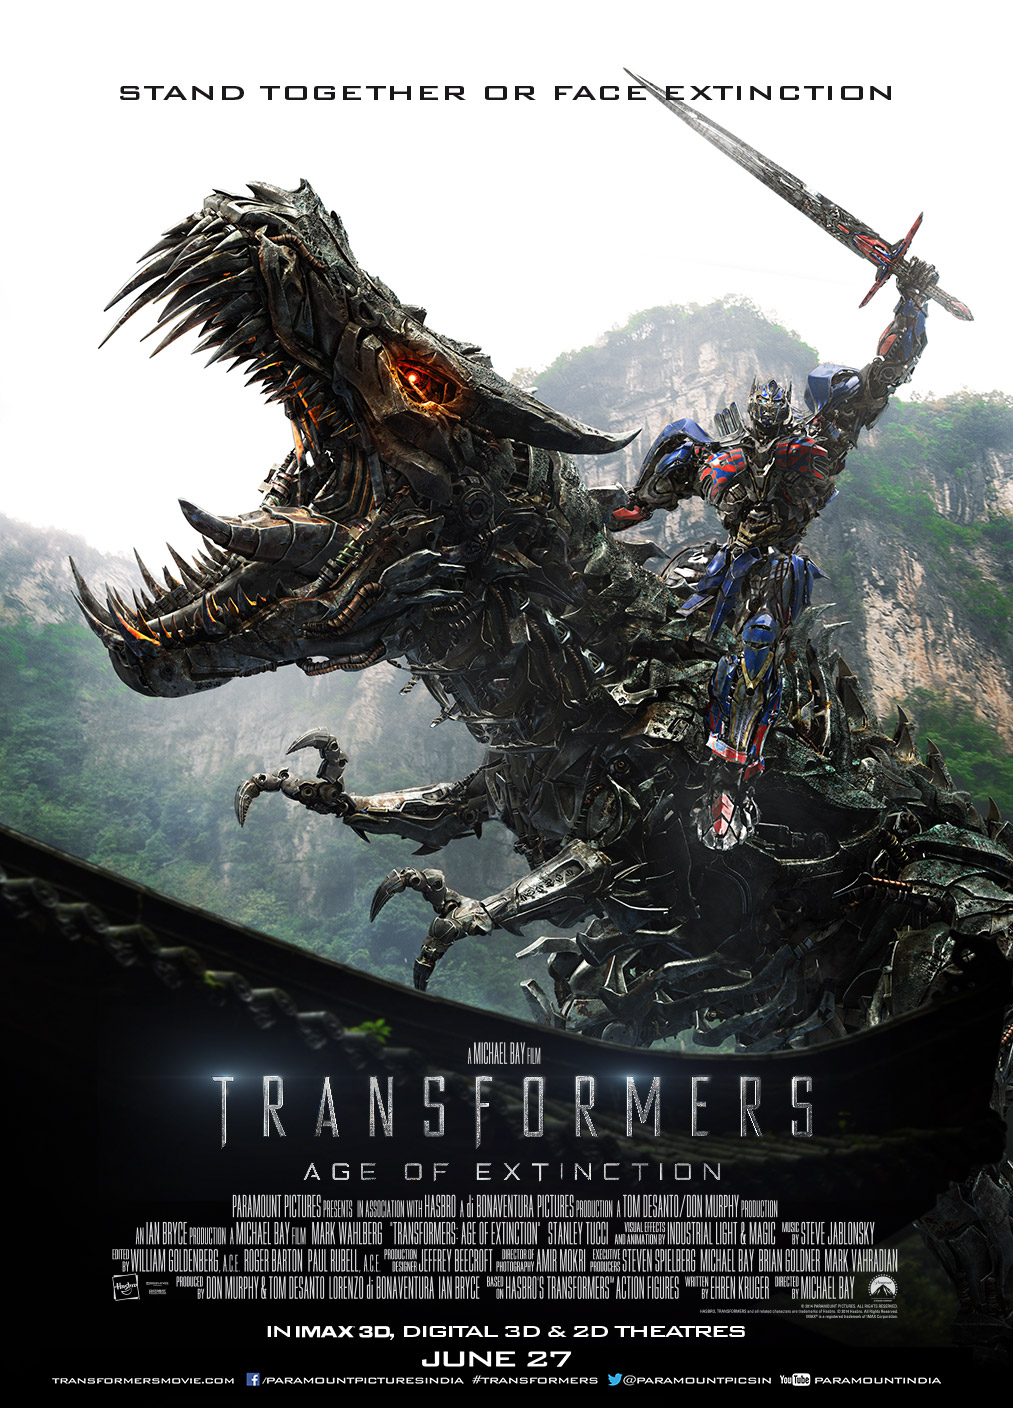 'Transformers Age of Extinction' releases new video